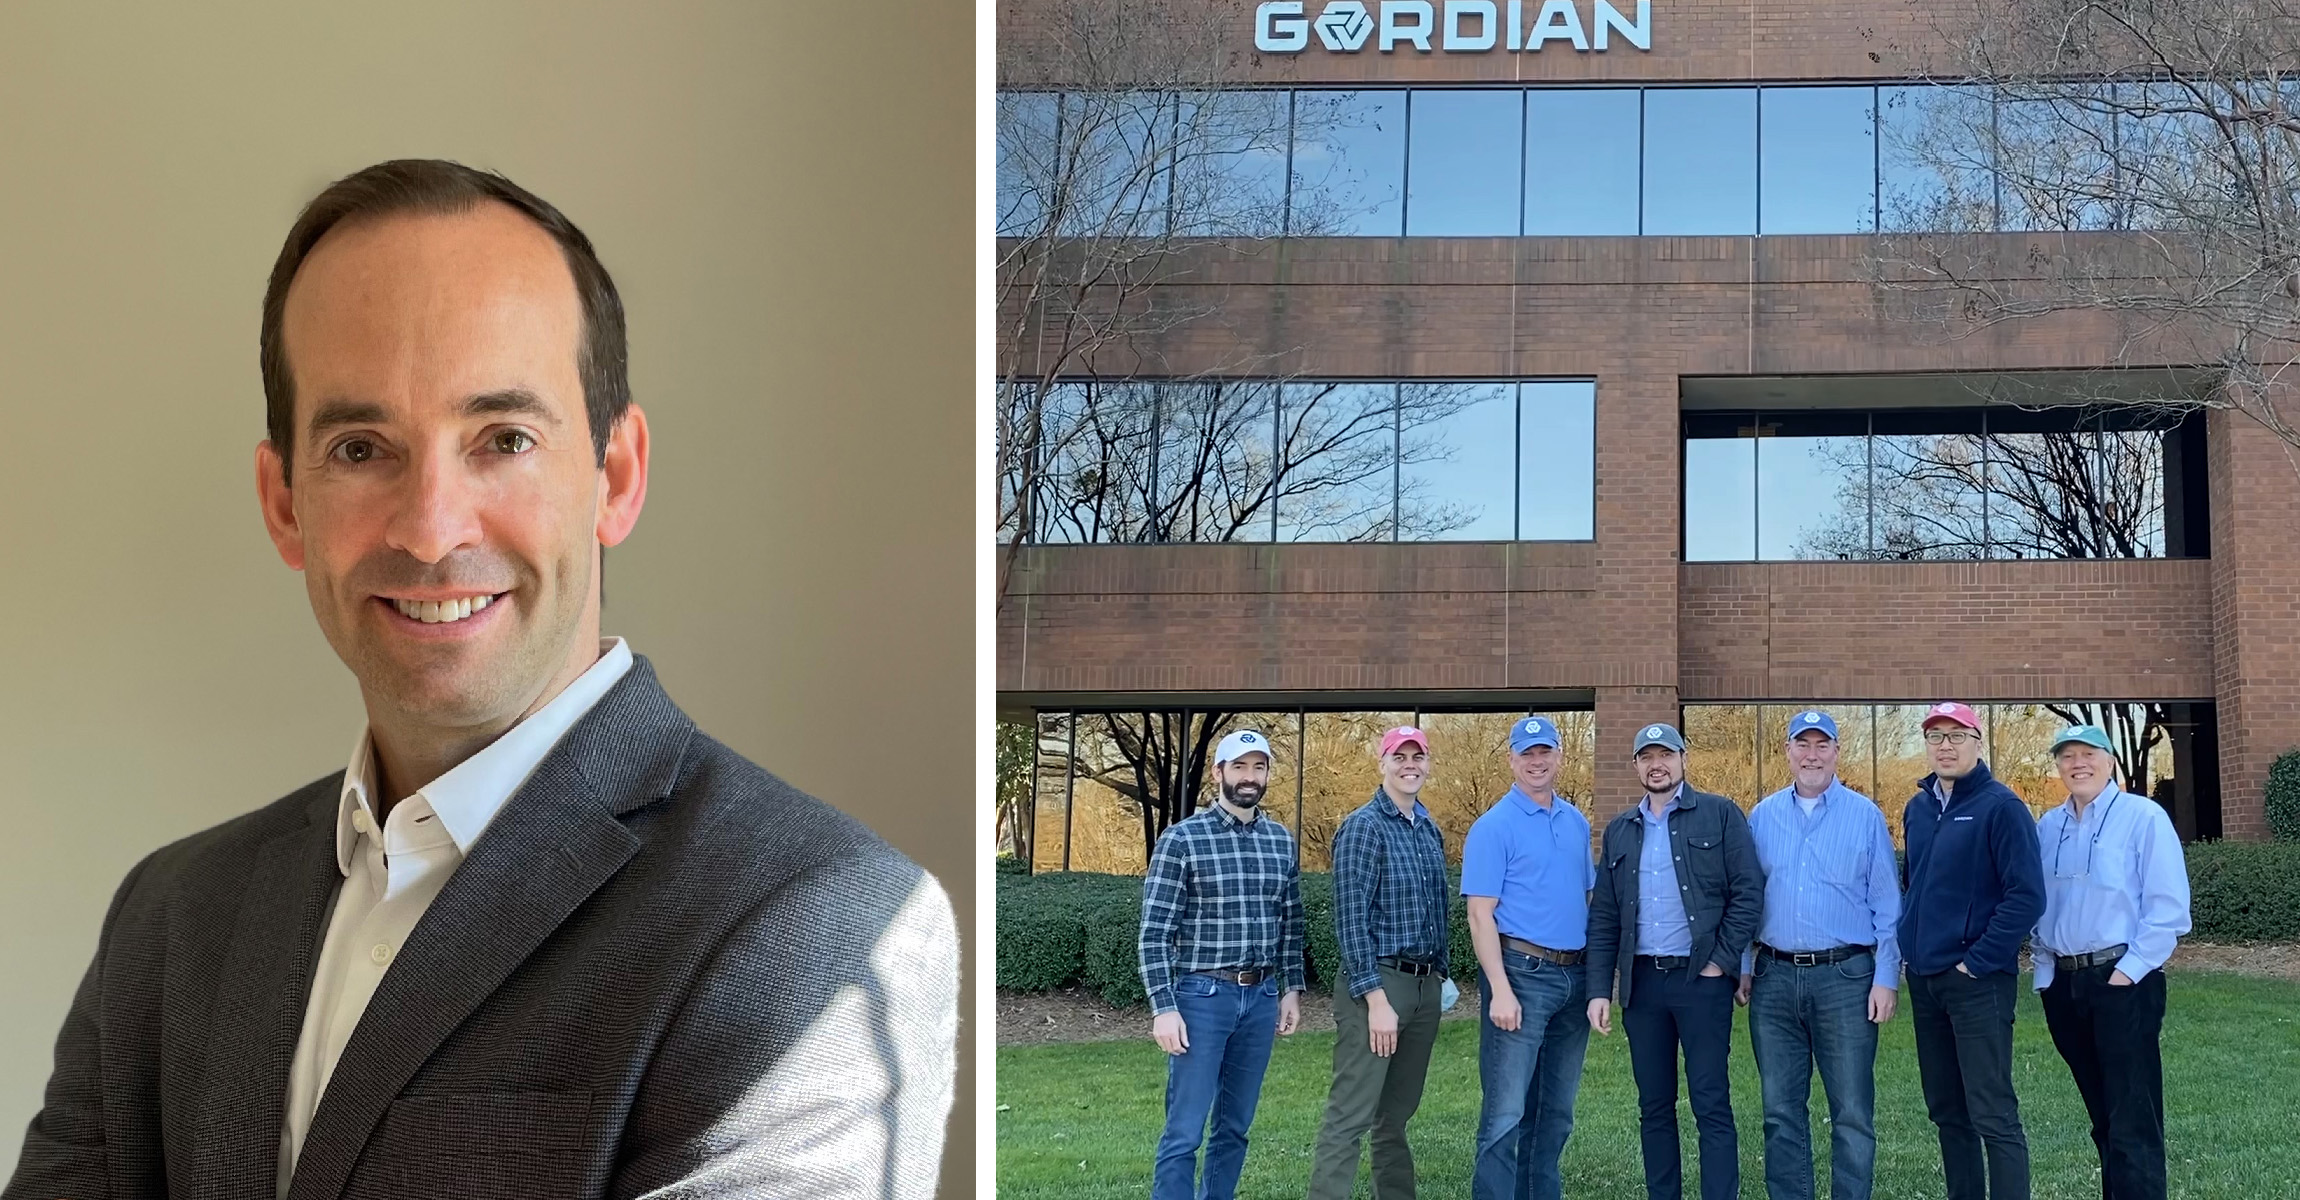 Jim Streeter and Team at Gordian's headquarters in Greenville, SC.